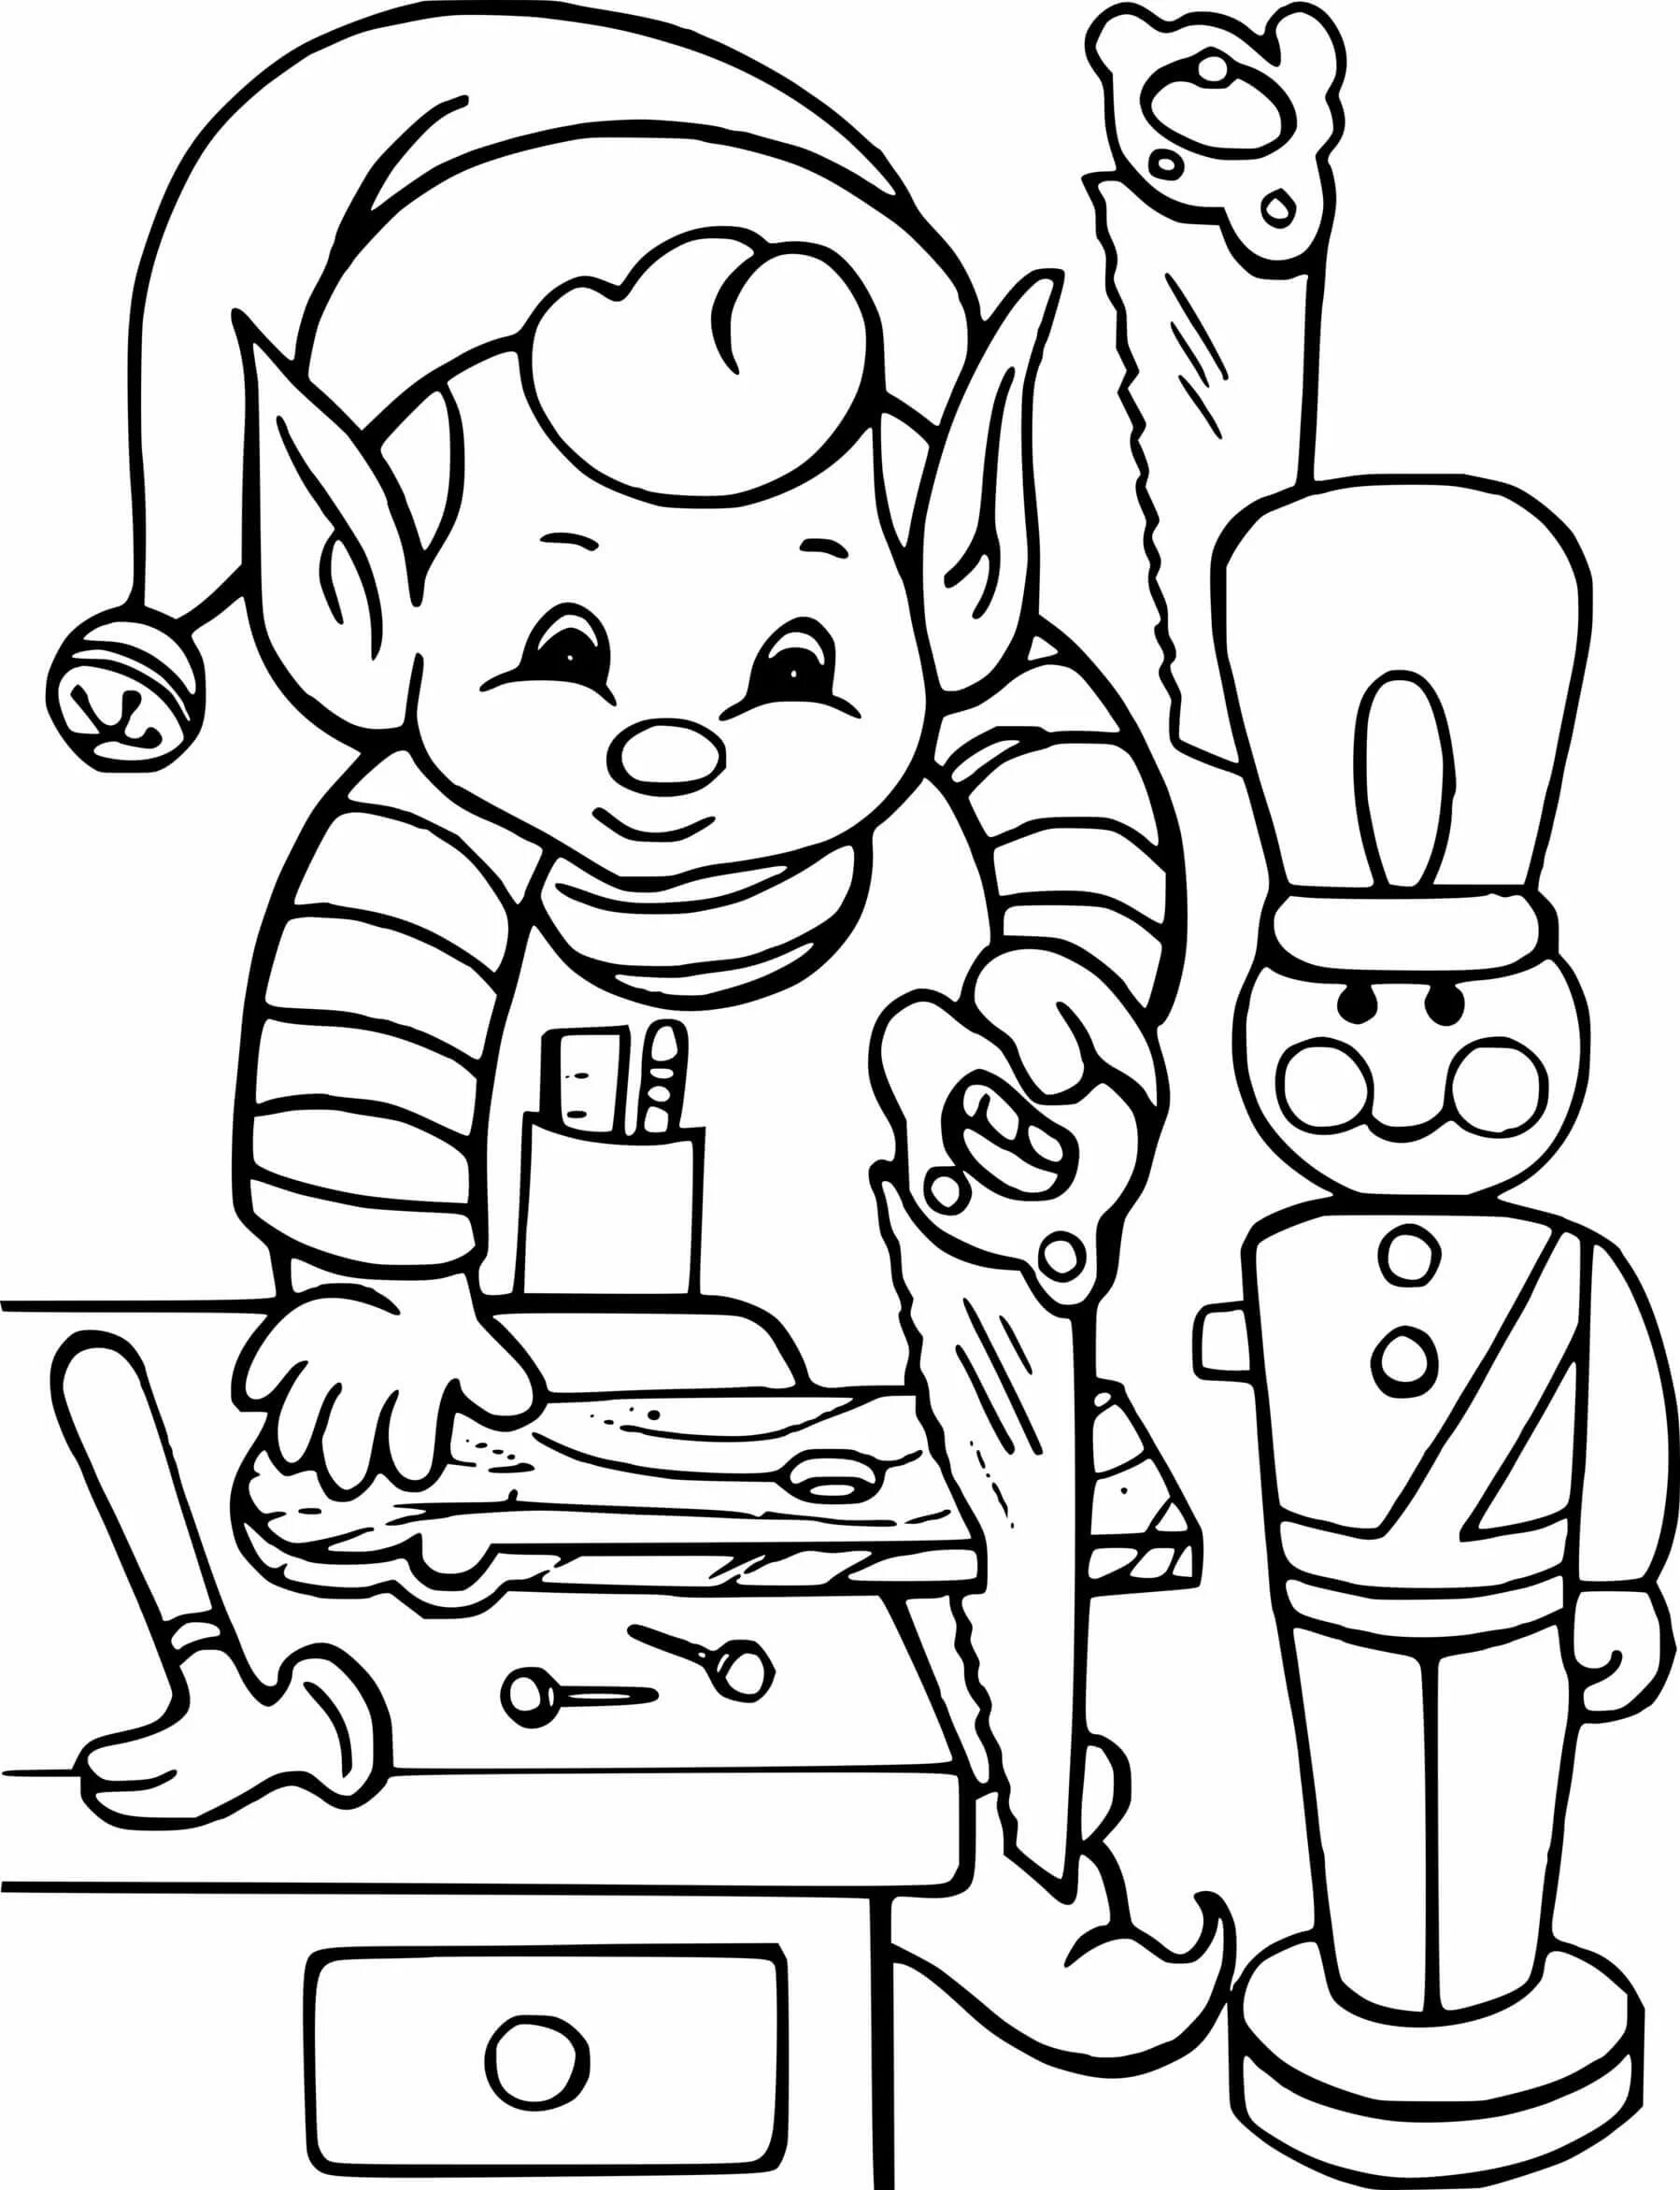 Creative elf coloring for kids